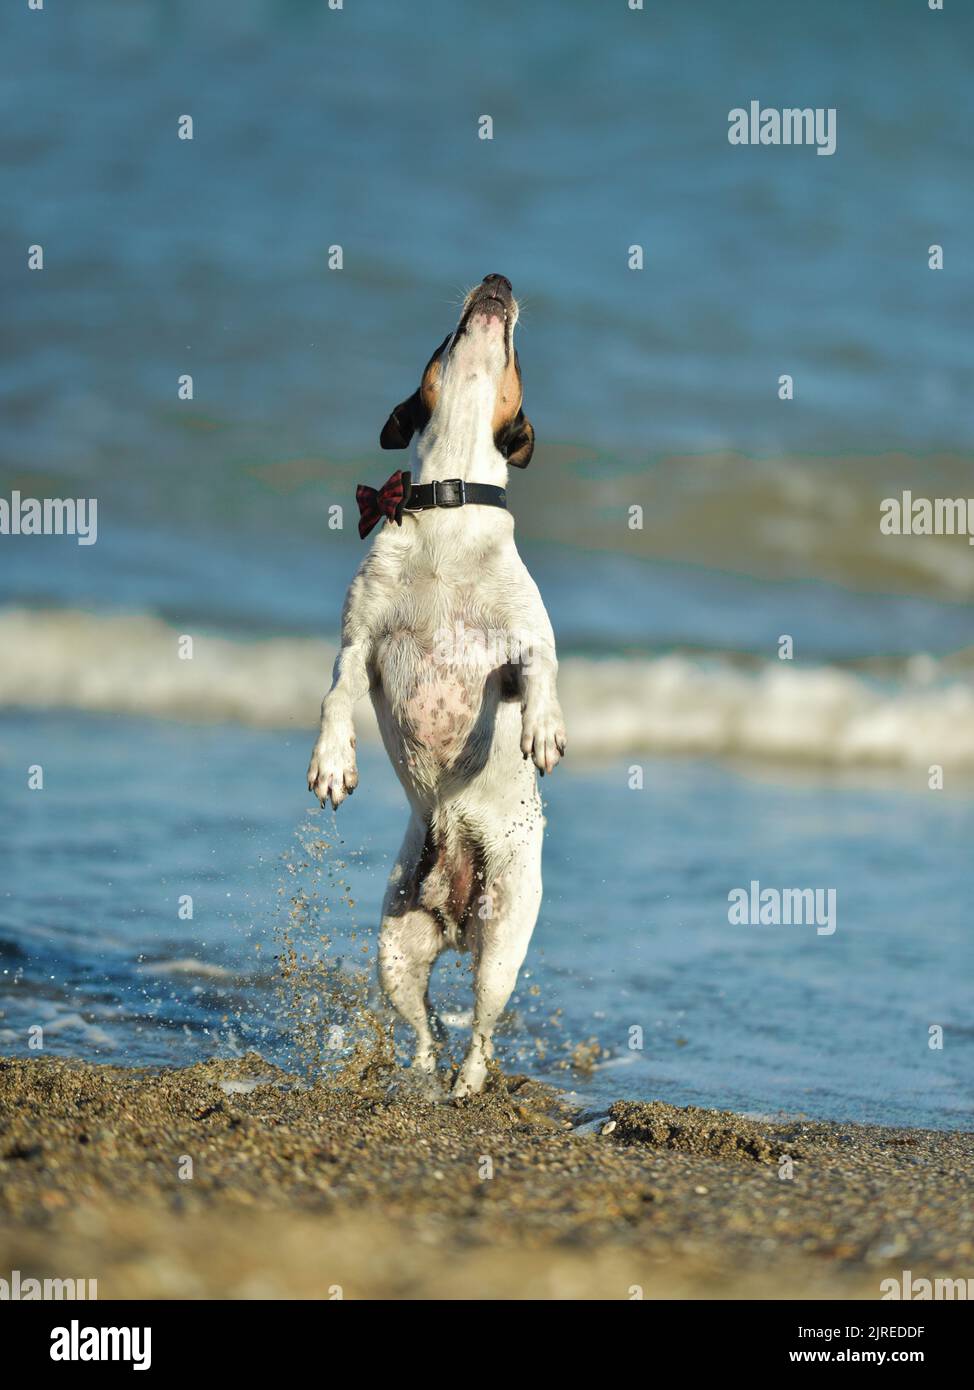 Happy dog jumping up in the water. Stock Photo